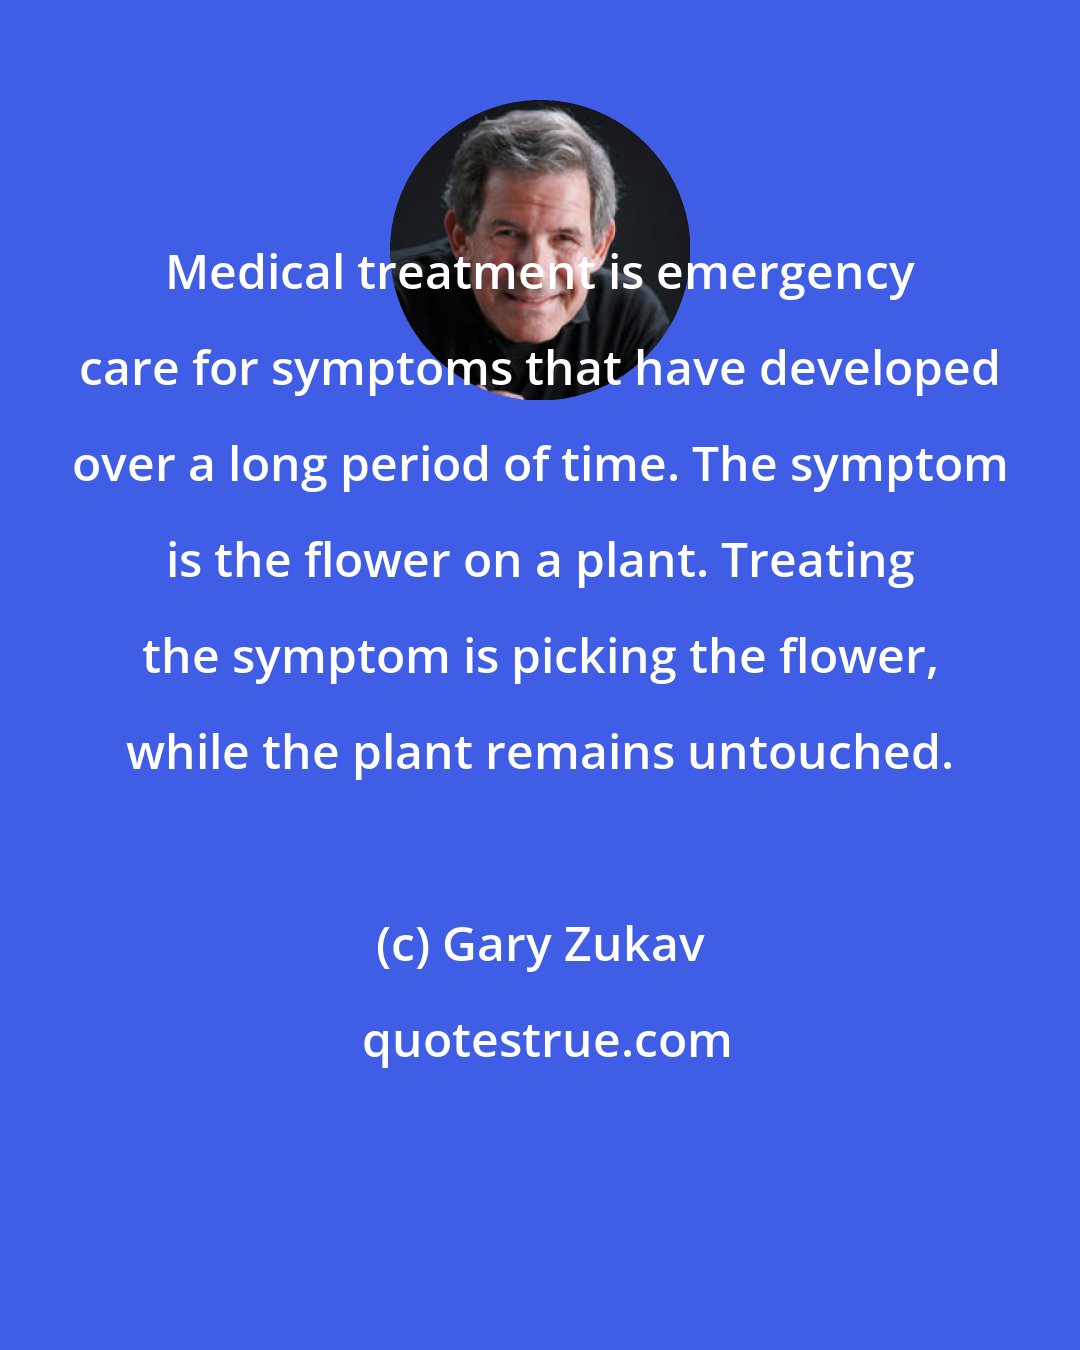 Gary Zukav: Medical treatment is emergency care for symptoms that have developed over a long period of time. The symptom is the flower on a plant. Treating the symptom is picking the flower, while the plant remains untouched.